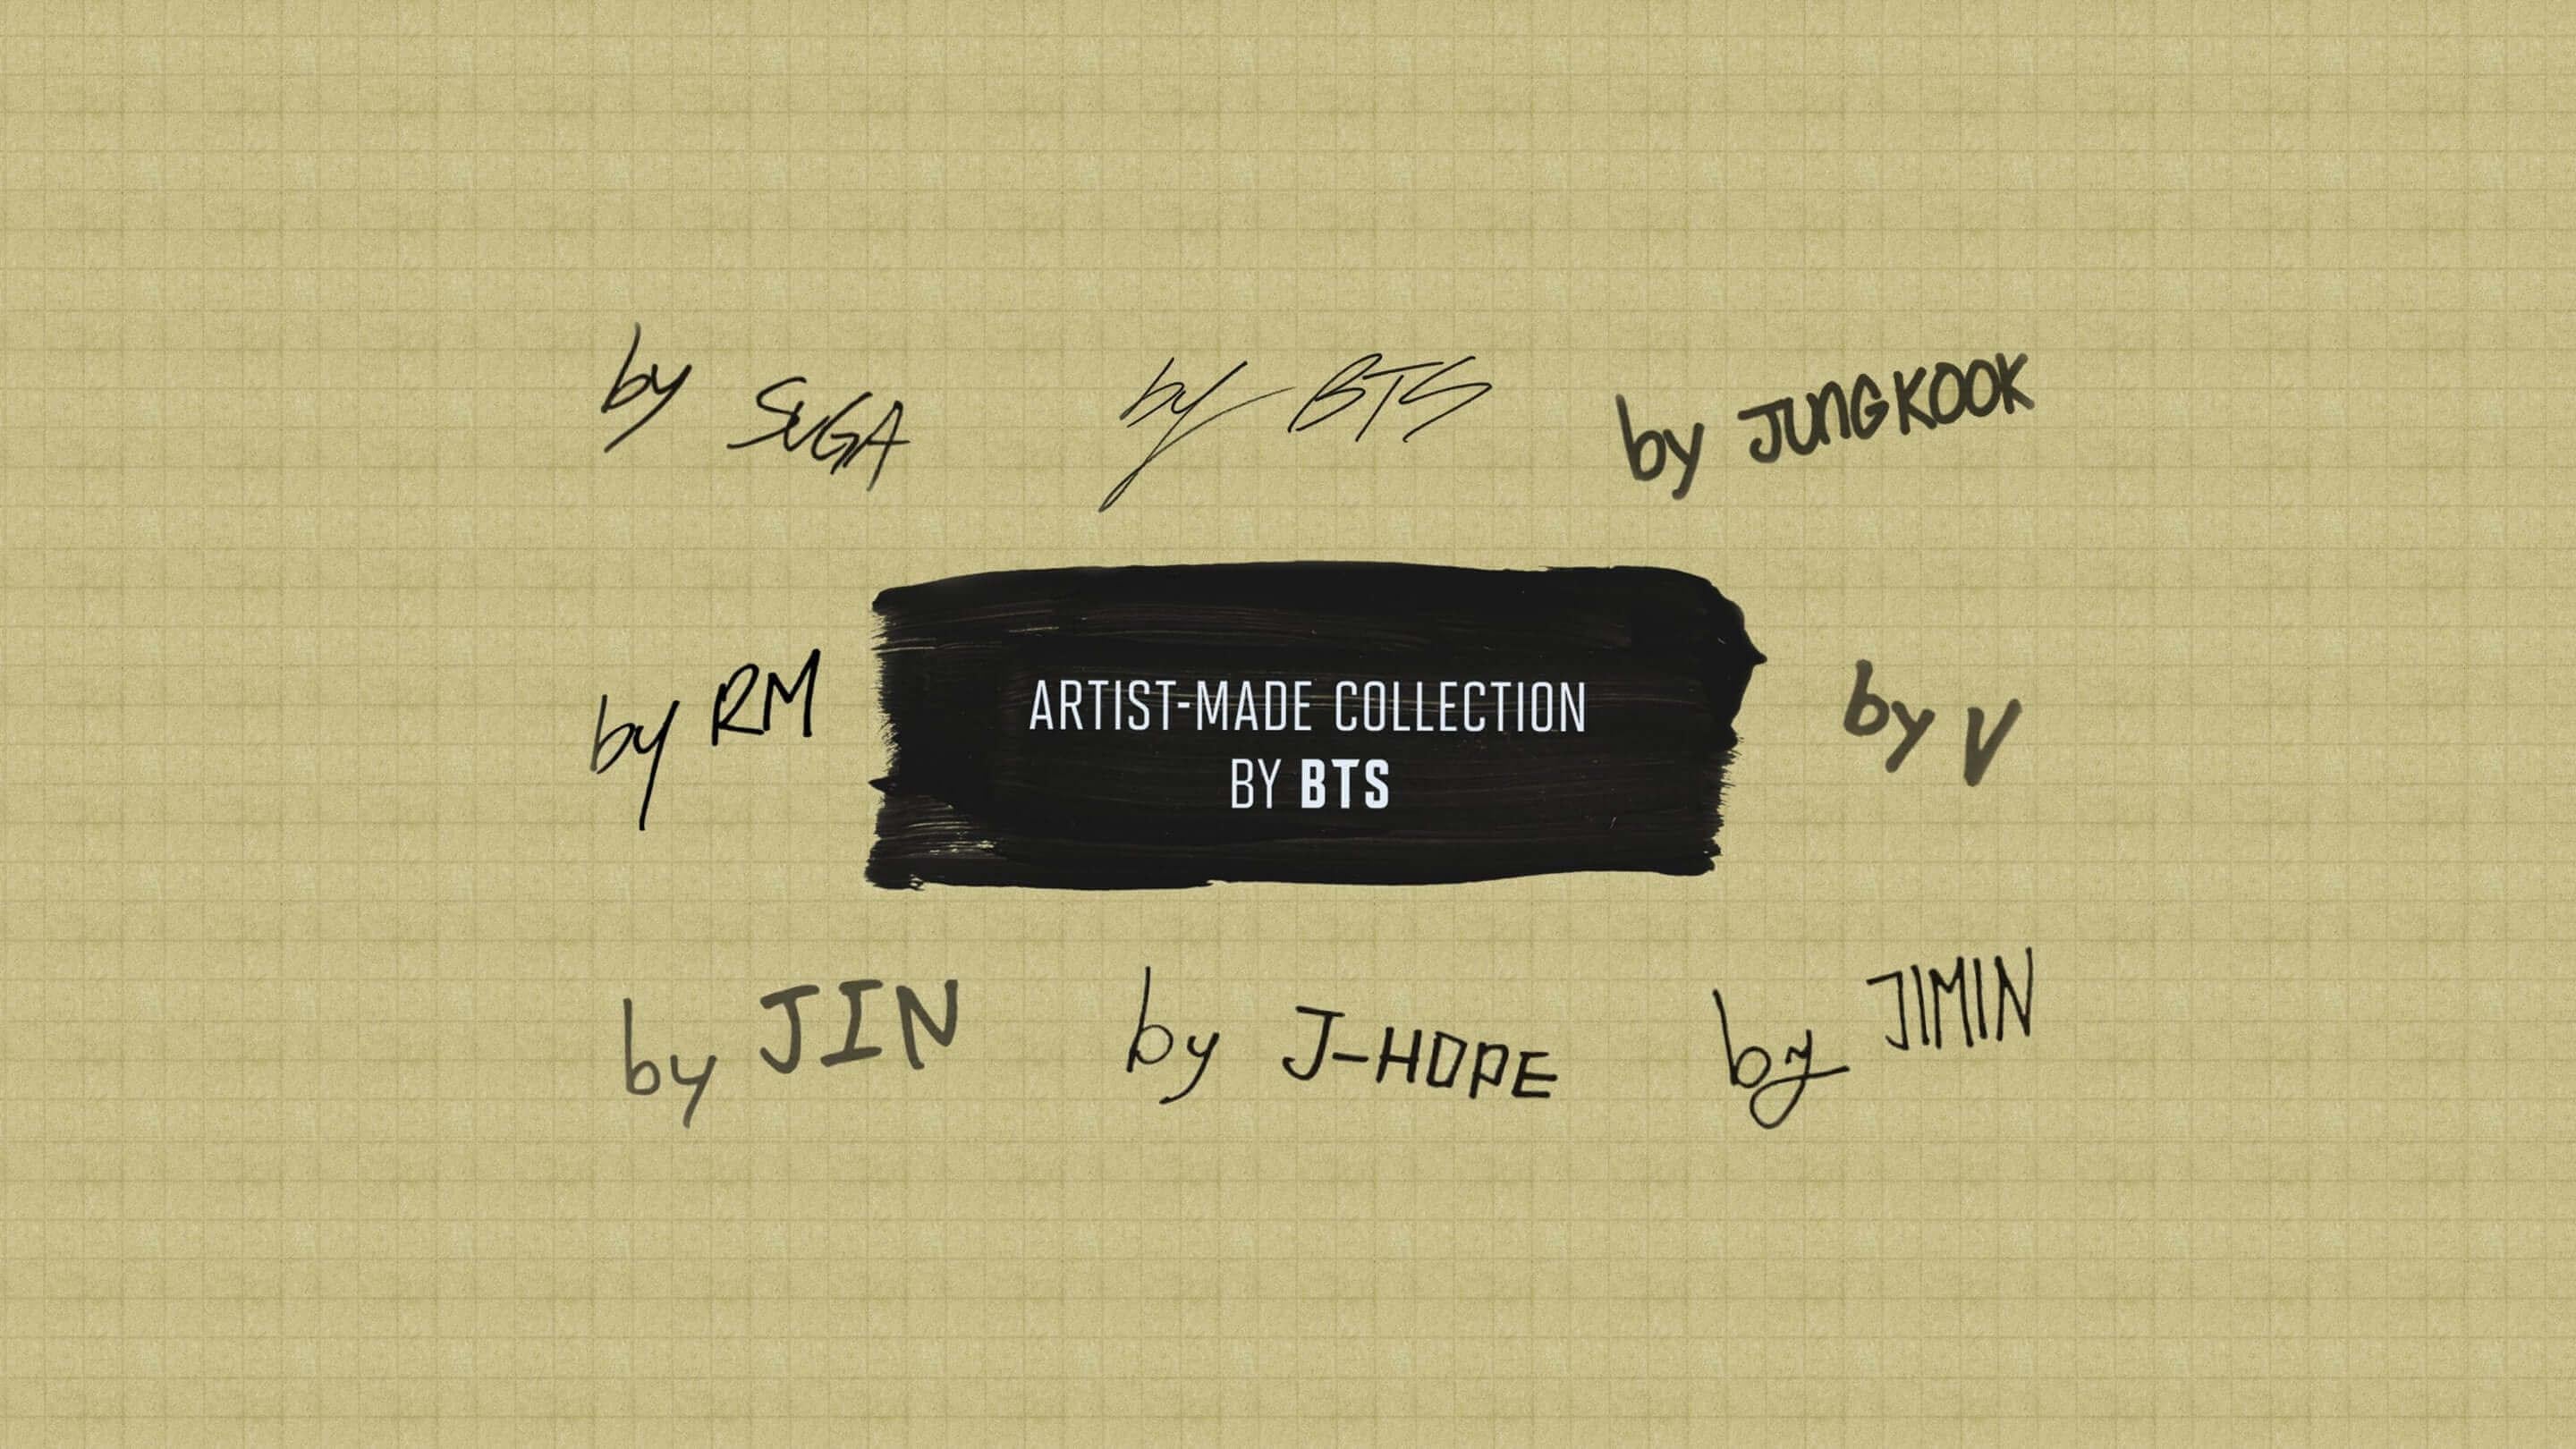 ✨ ARTIST-MADE COLLECTION BY BTS ✨| Your Kpop Store - Daebak